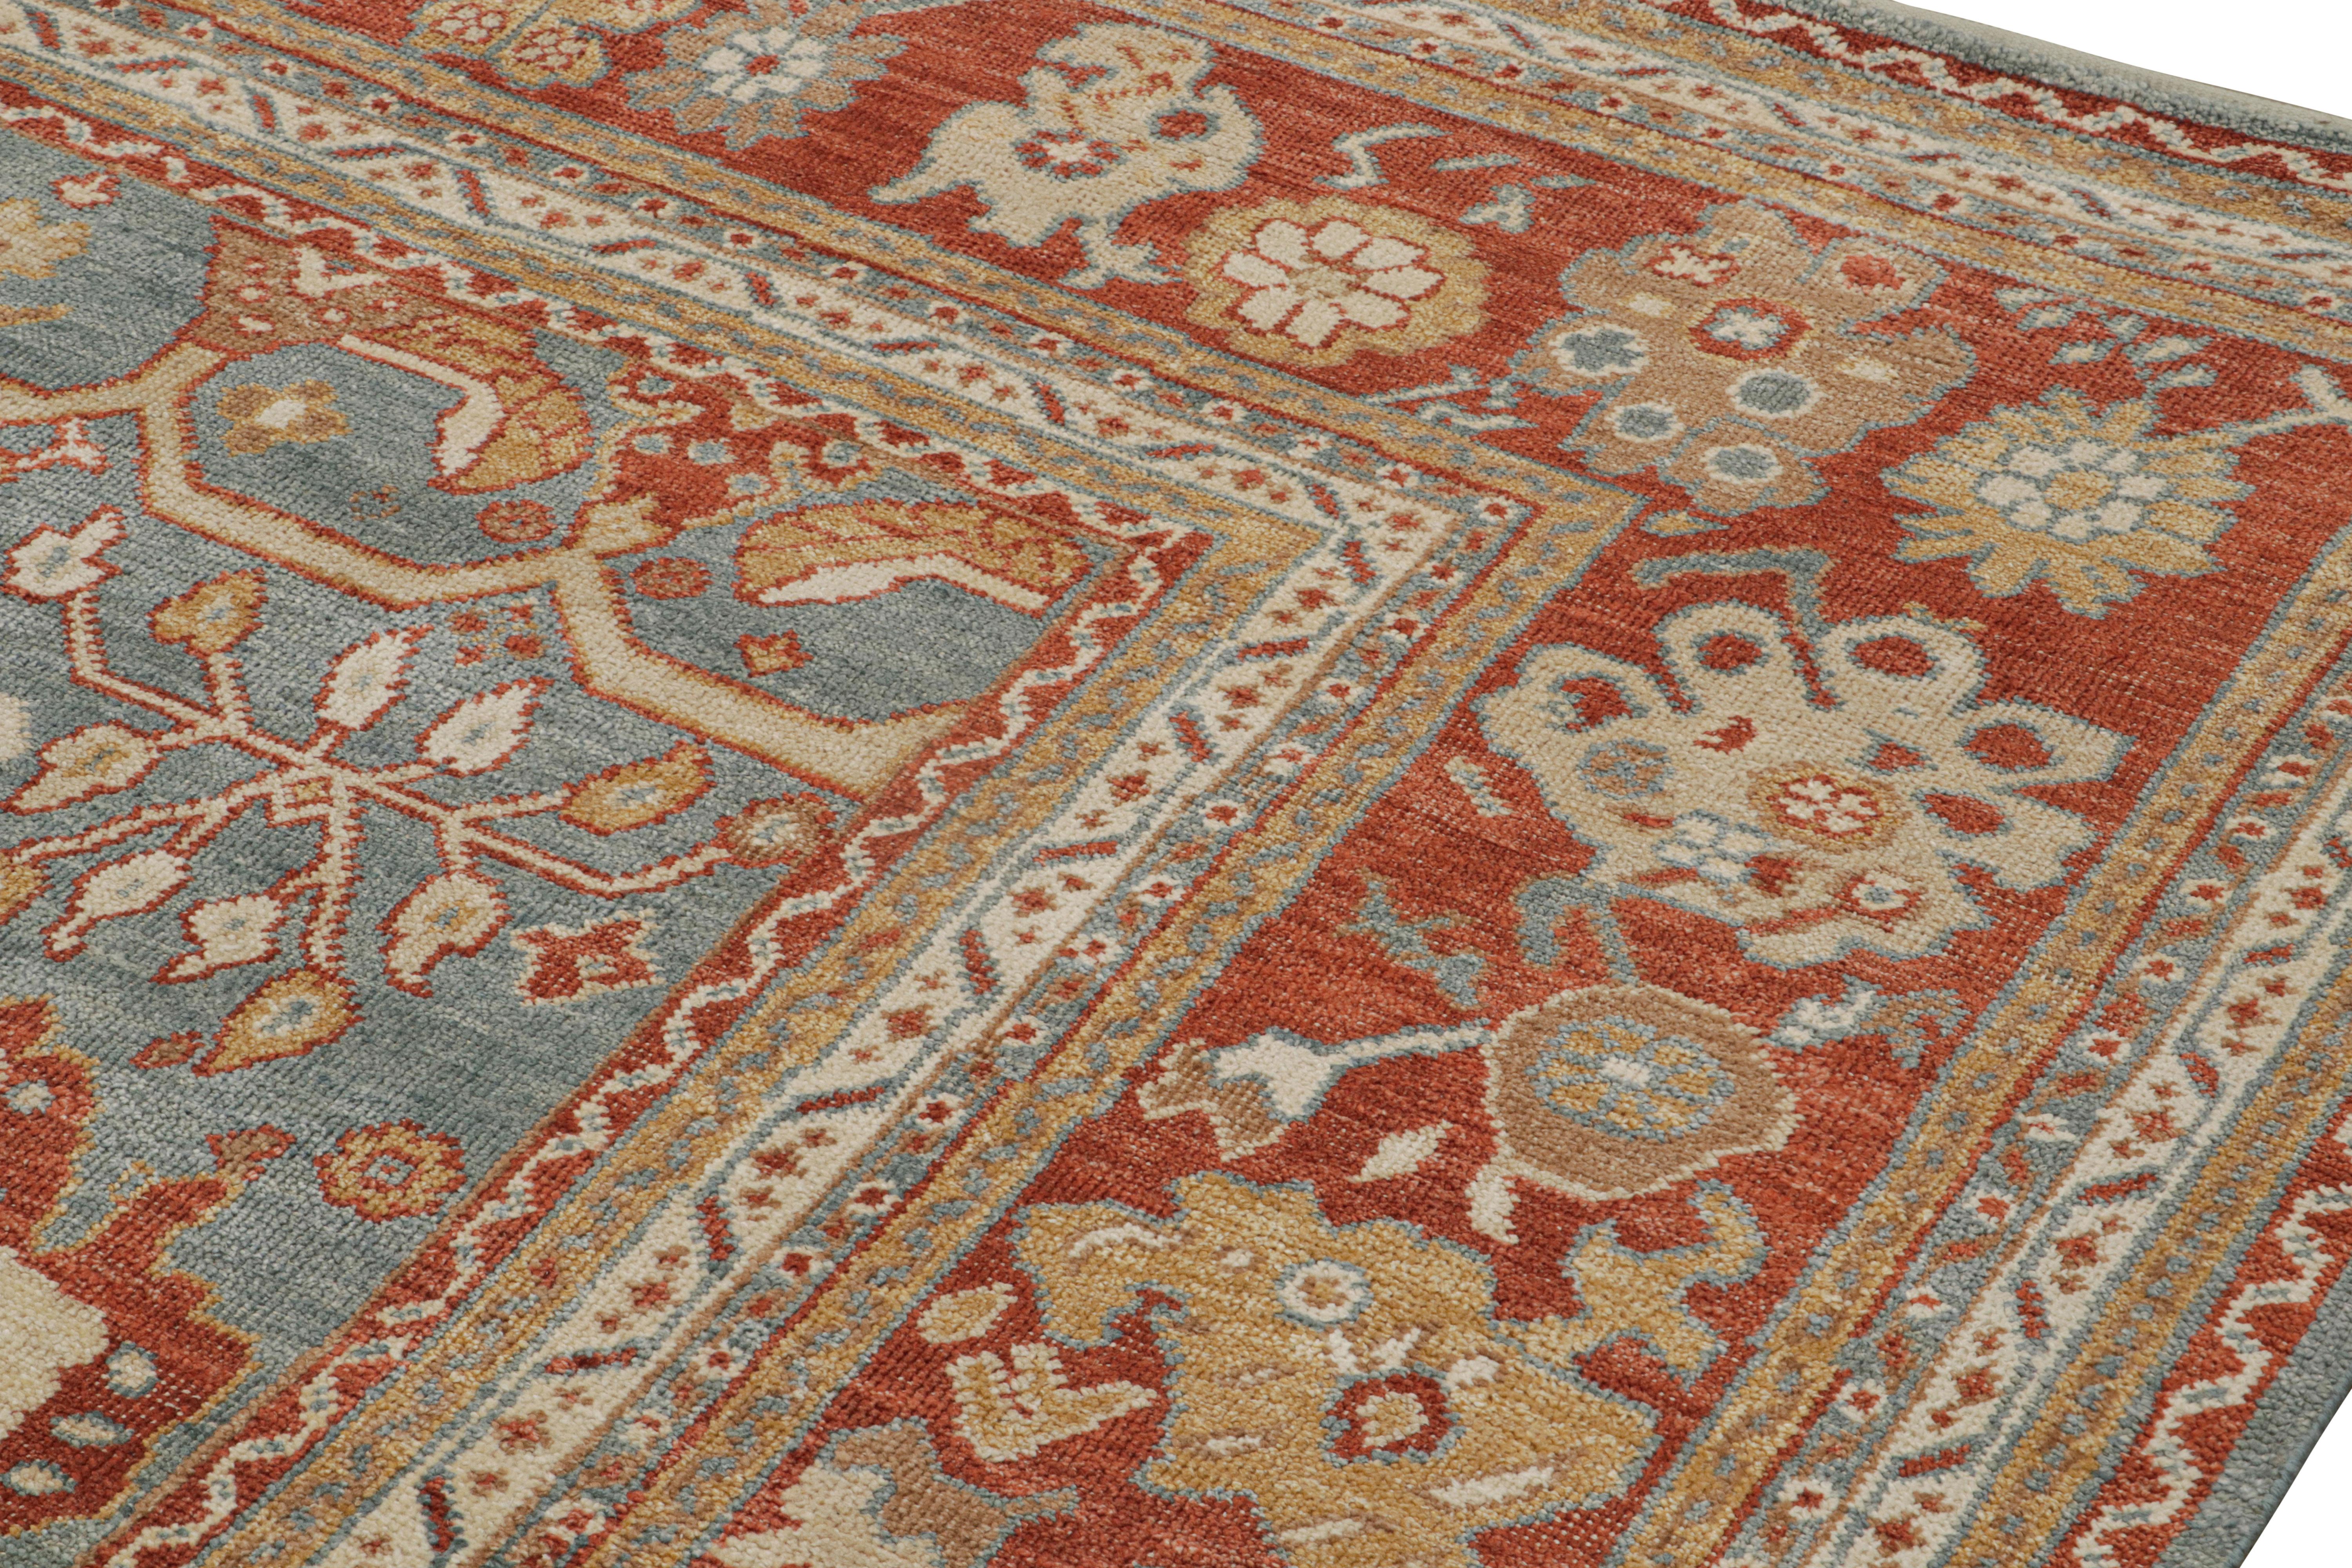 Rug & Kilim’s Oushak Style Rug In Red, Blue and Brown Floral Pattern In New Condition For Sale In Long Island City, NY